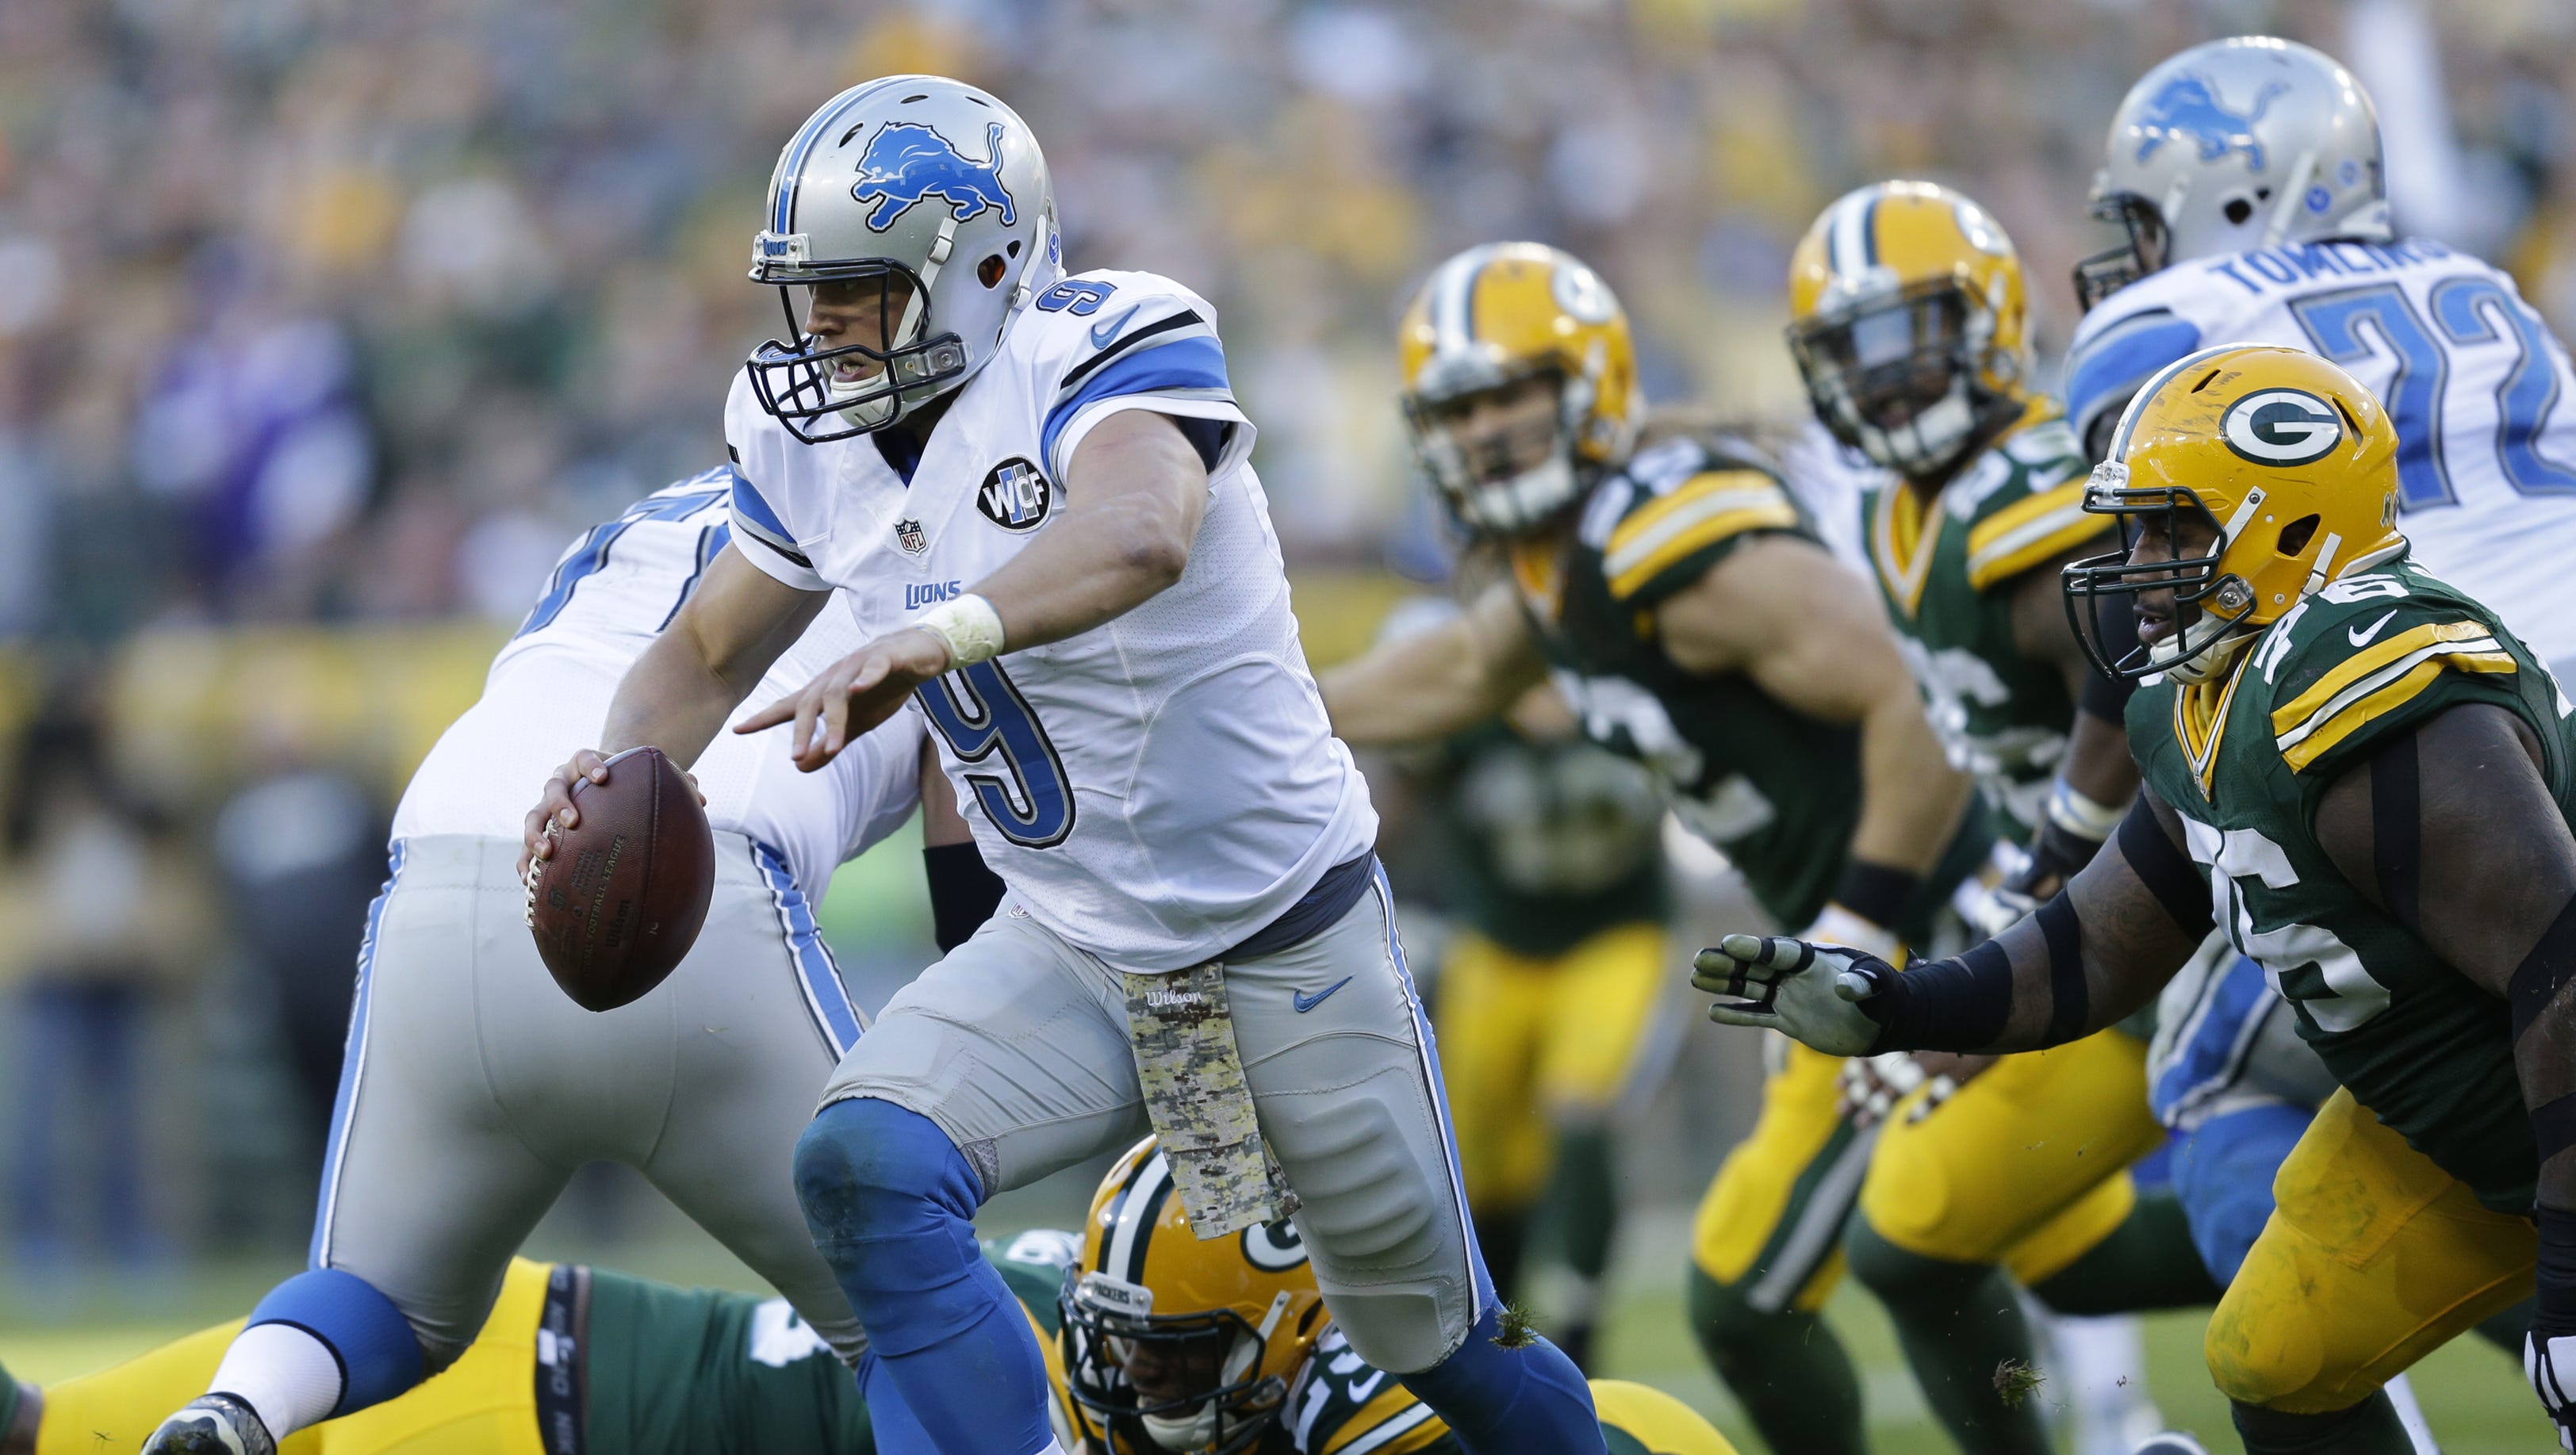 Quarterback Matthew Stafford and the Detroit Lions will learn a lot about their playoff chances Sunday against the New York Giants in the Meadowlands.